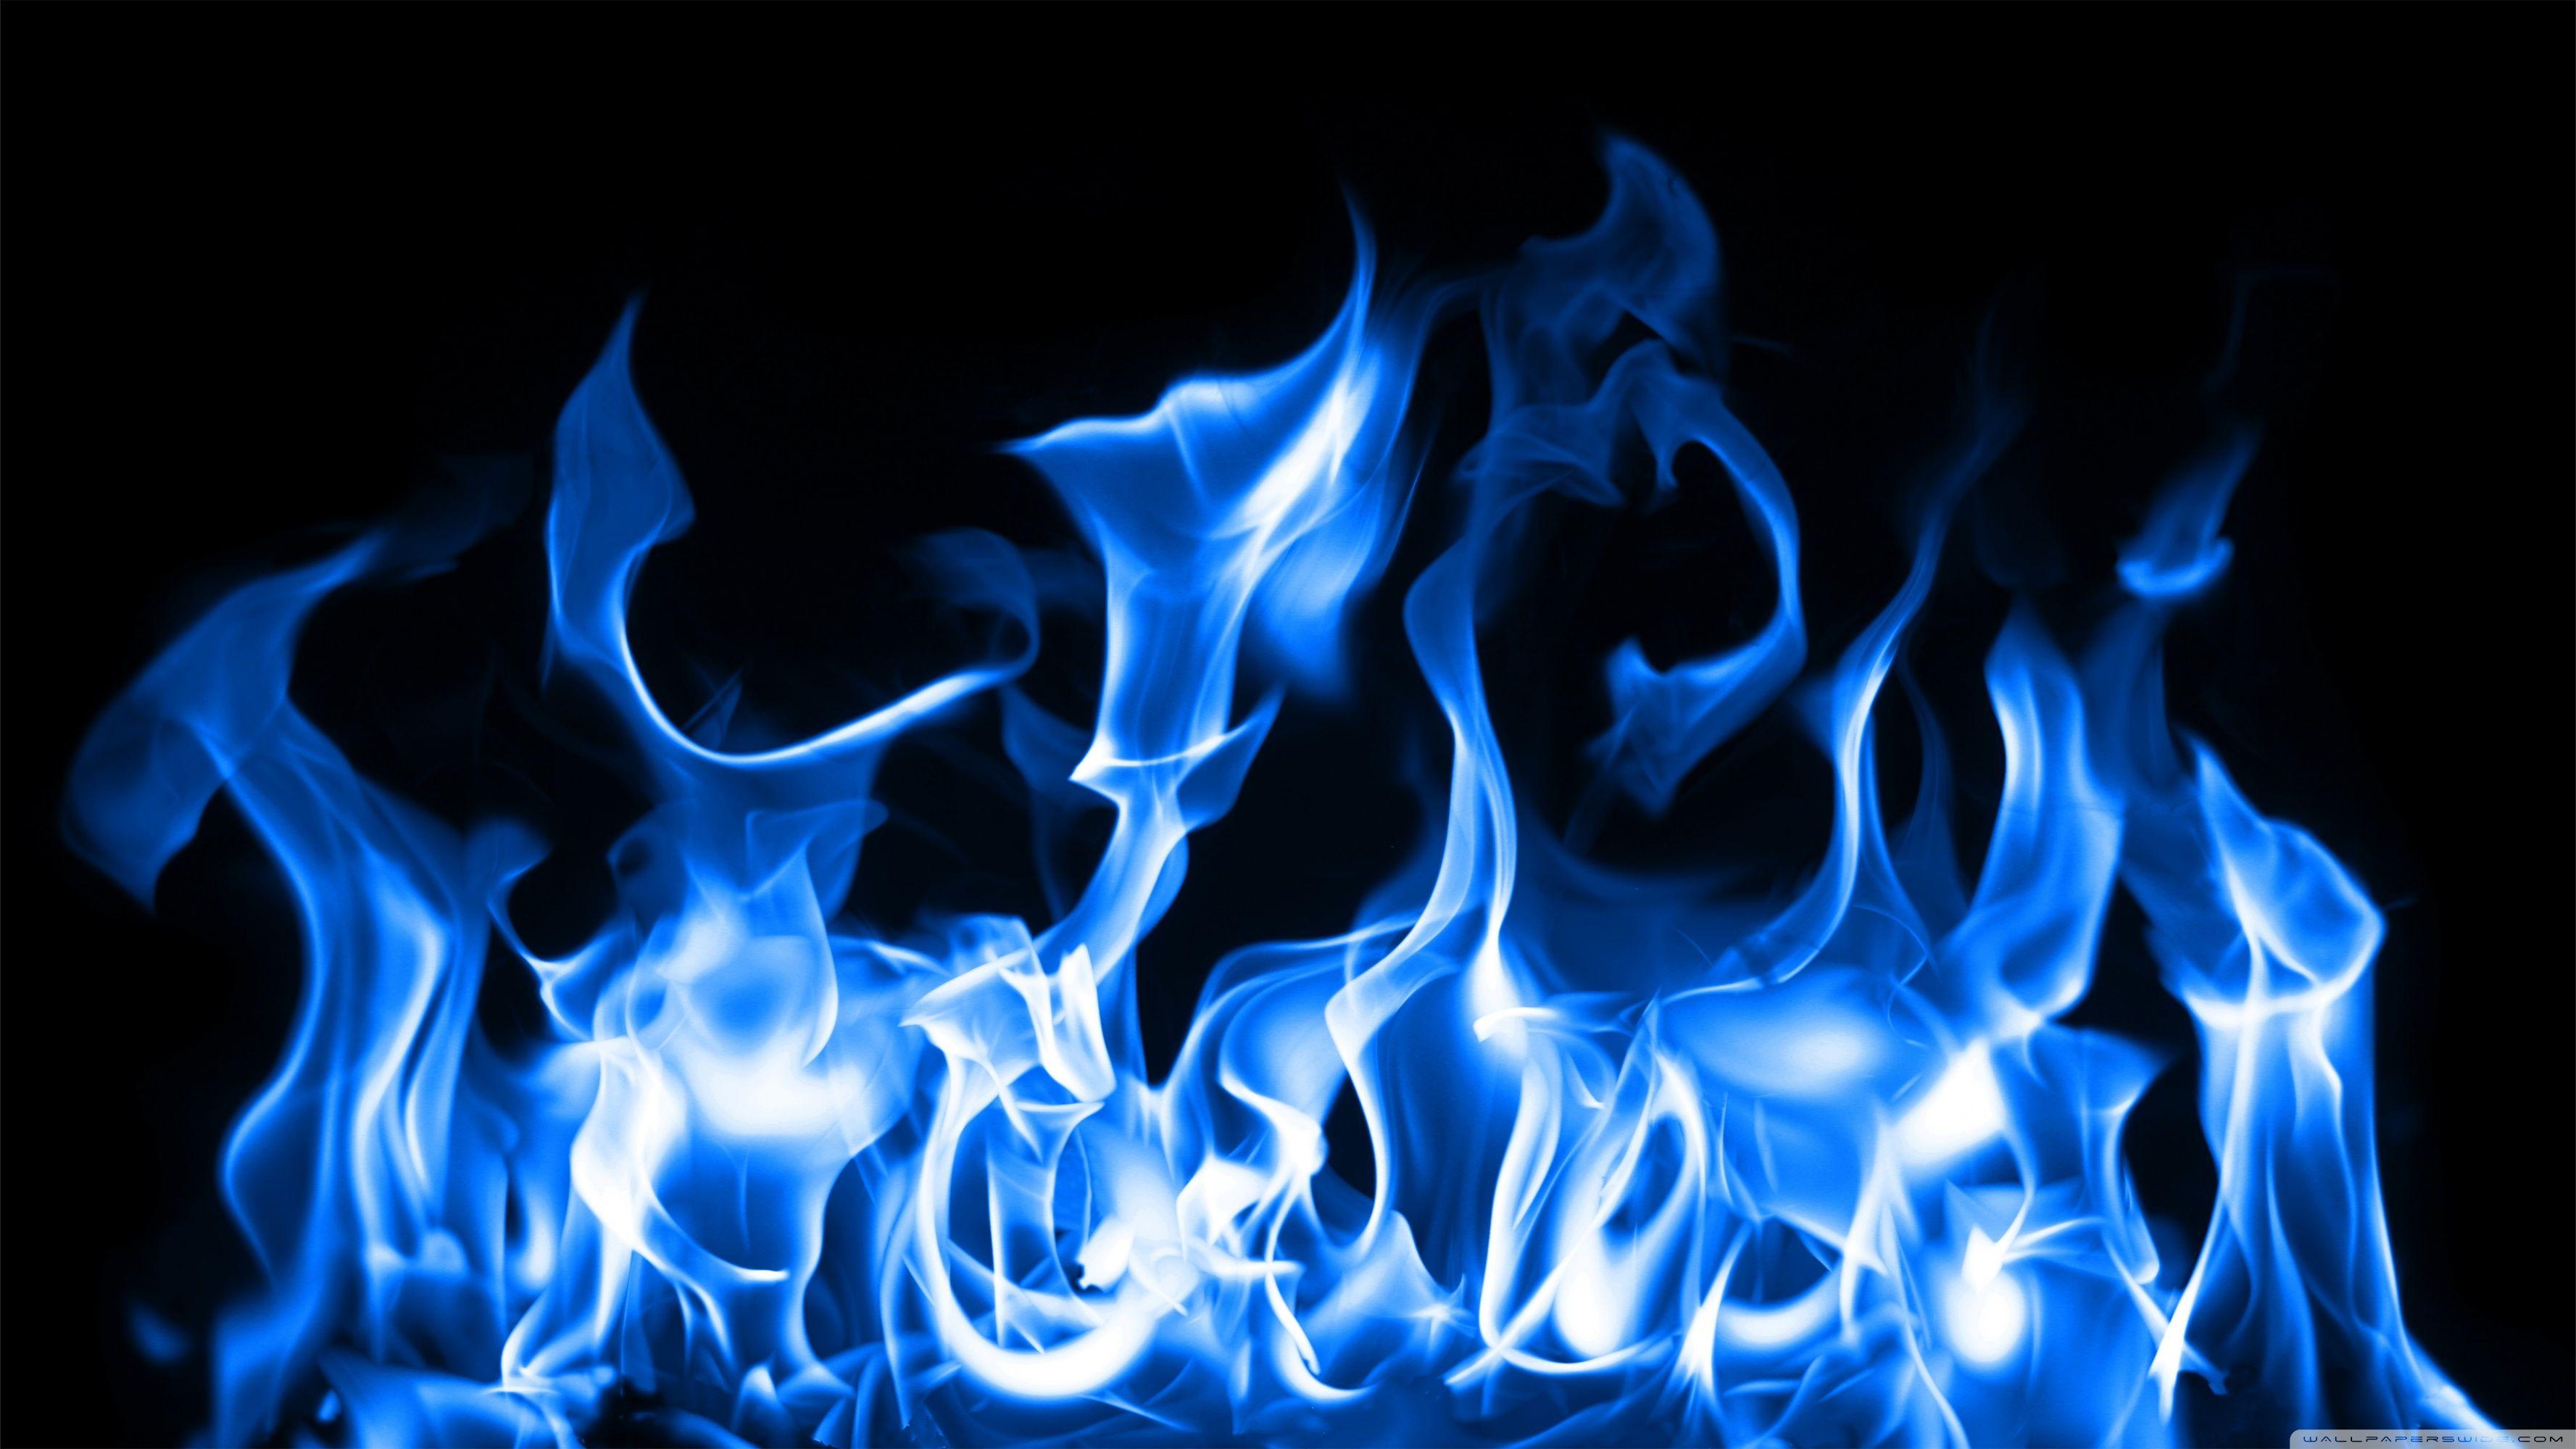 Red Flame Blue Fire 4K Abstract Artwork  Free Live Wallpaper  Live  Desktop Wallpapers